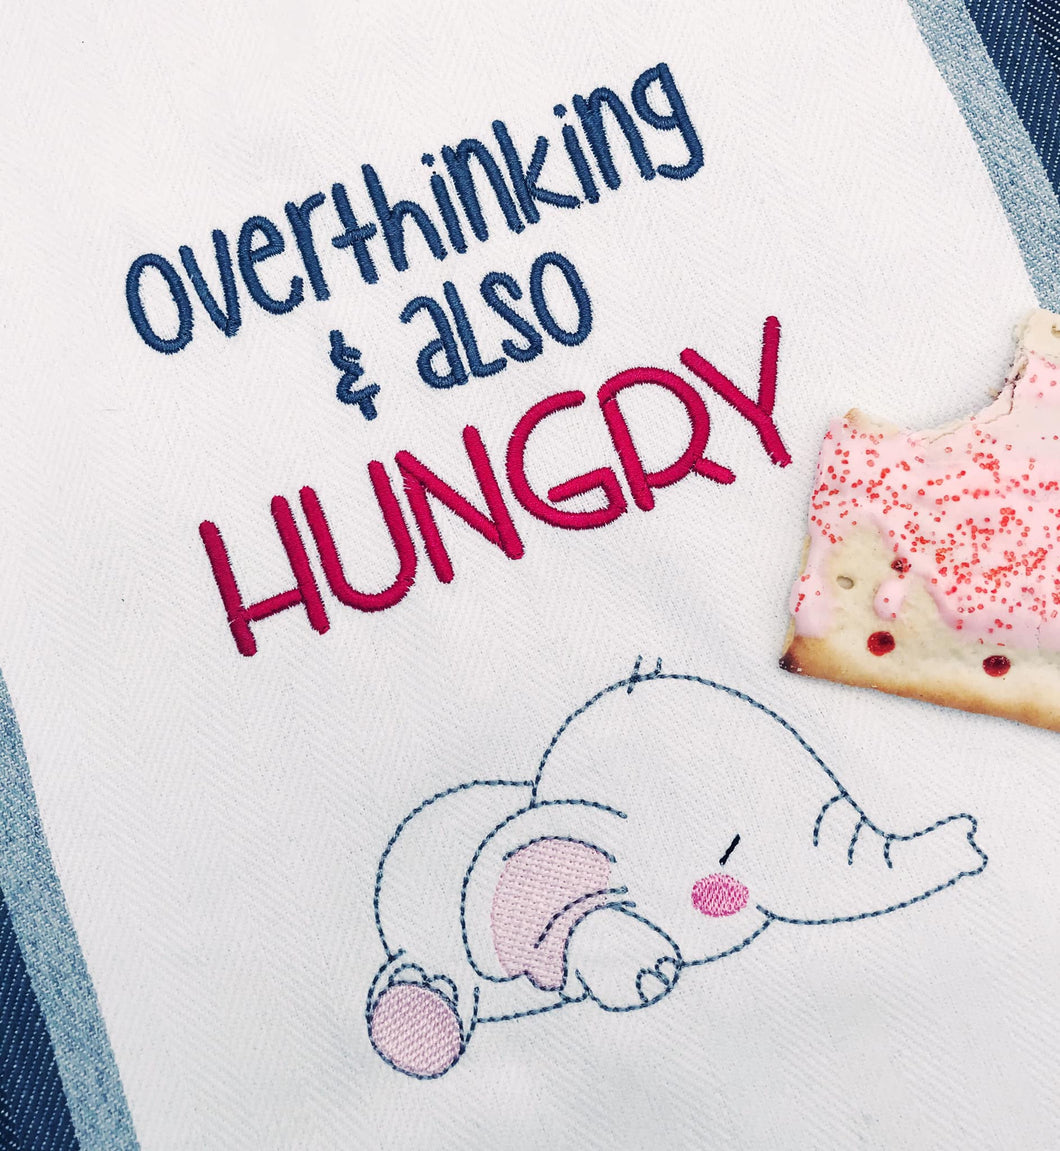 Overthinking and also hungry embroidery design (4 sizes included) machine embroidery design DIGITAL DOWNLOAD